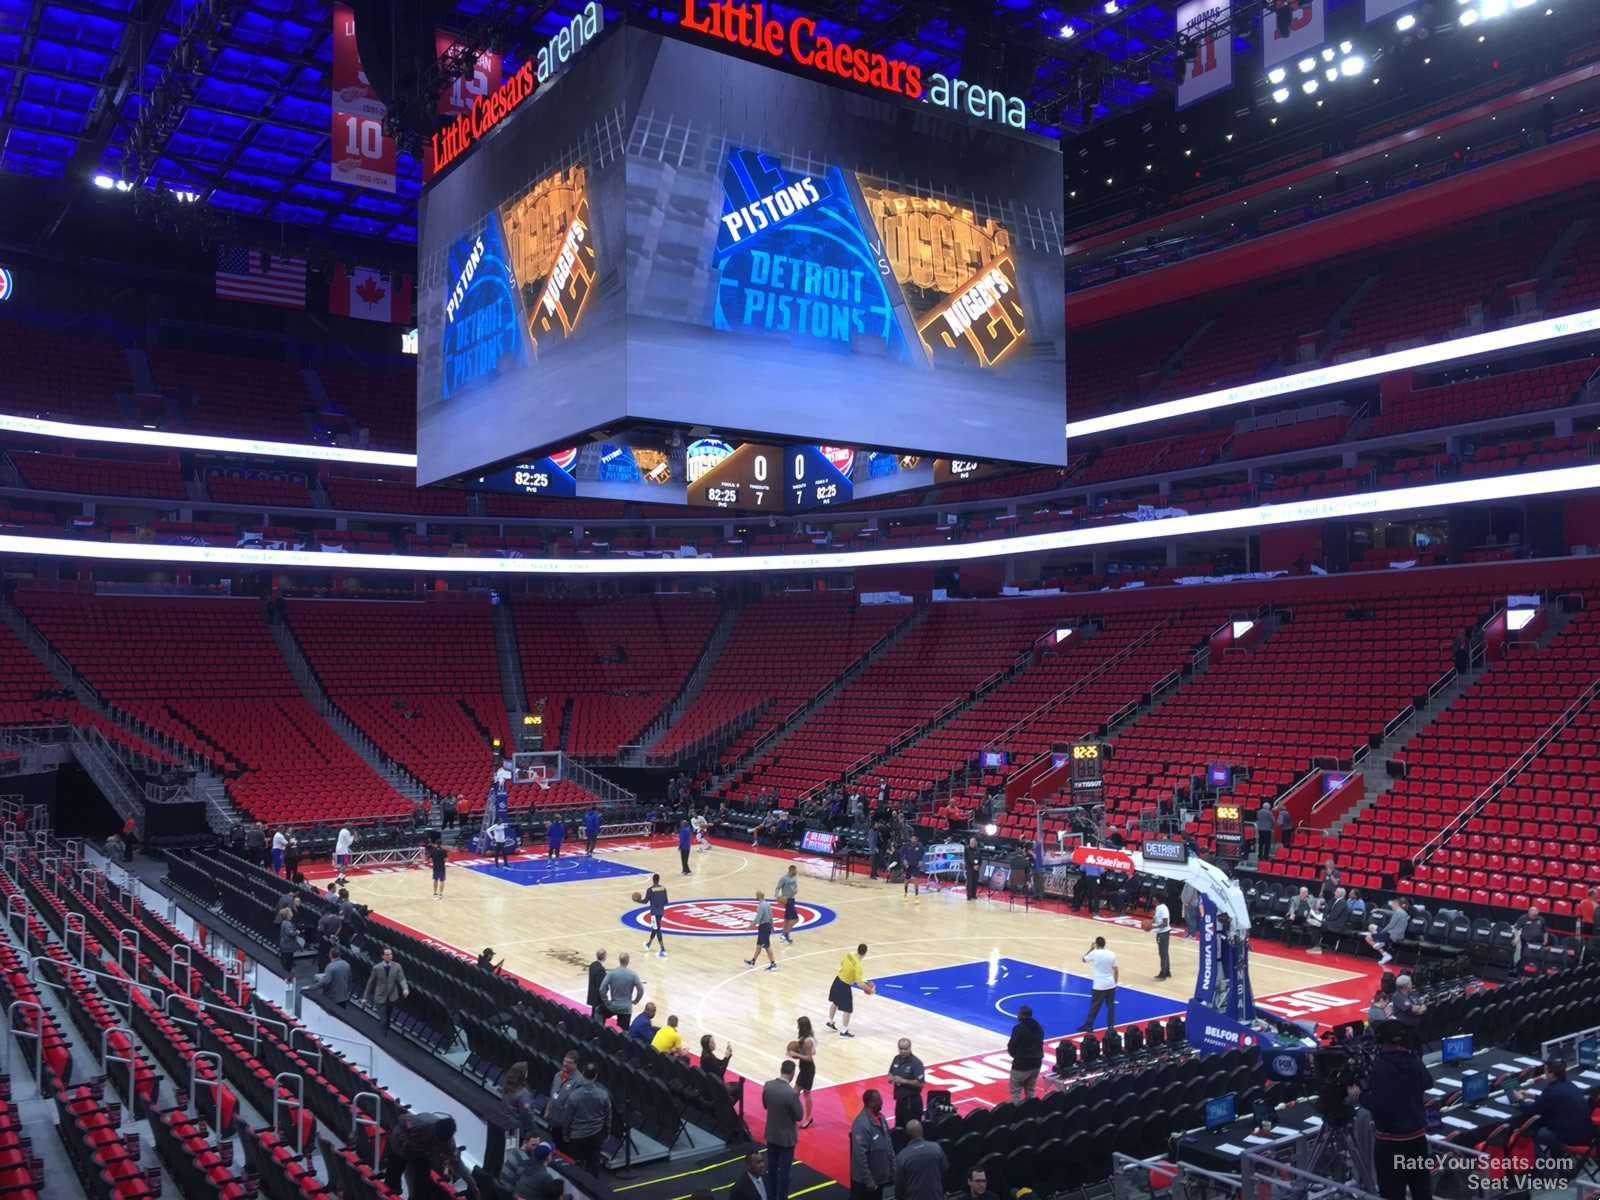 section 105, row 10 seat view  for basketball - little caesars arena